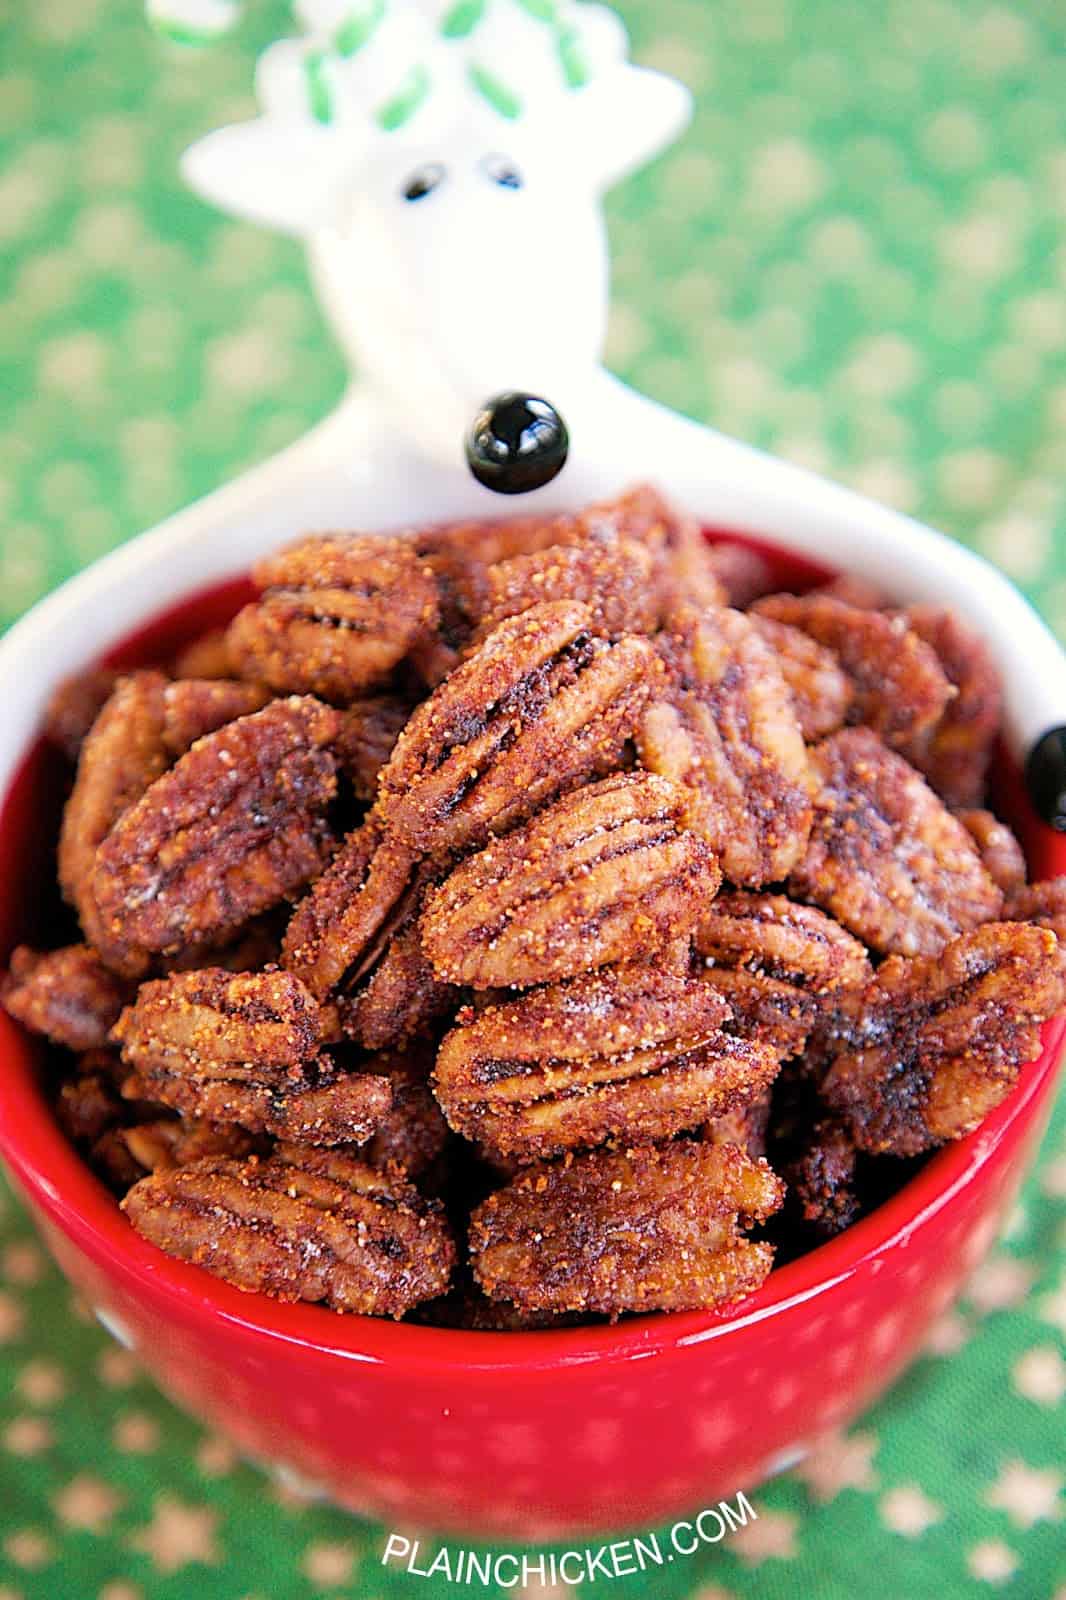 Sweet & Spicy Pecans - seriously delicious!!! Made these for a holiday party and they were gone in a flash! Everyone asked for the recipe! Pecans, water, sugar, chili powder, cayenne pepper. I always double or triple the recipe and there are never any leftovers! Great for holiday gifts!